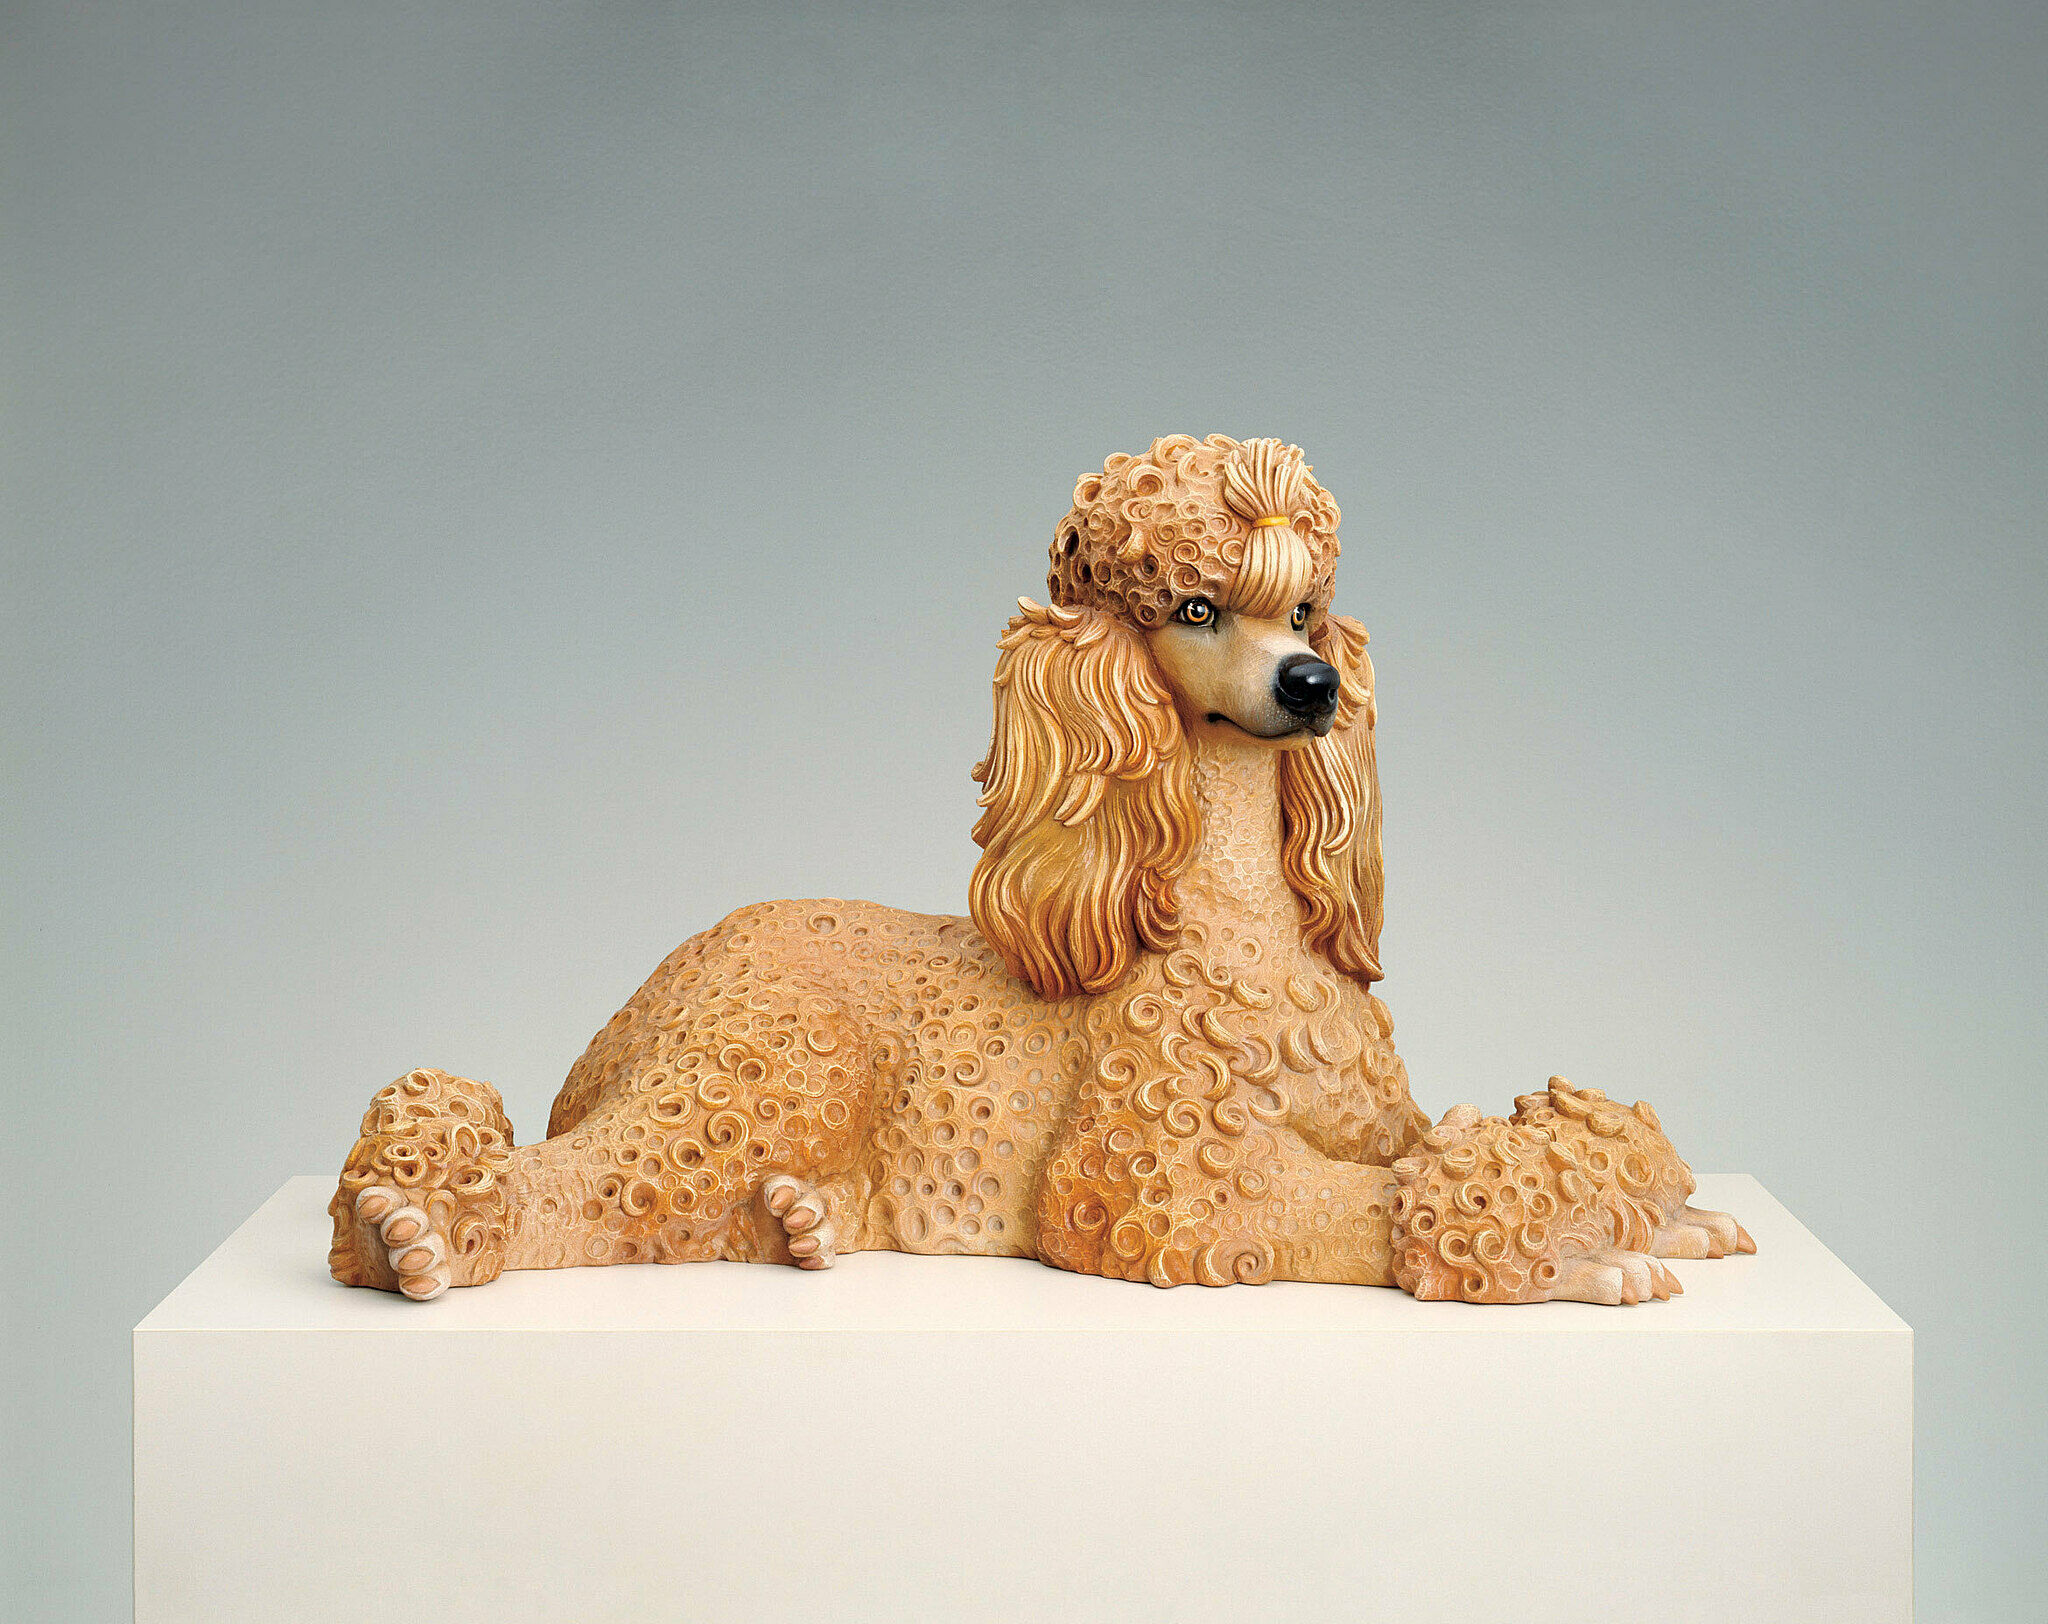 Sculpture of a meticulously groomed poodle with detailed curly fur, sitting on a pedestal.